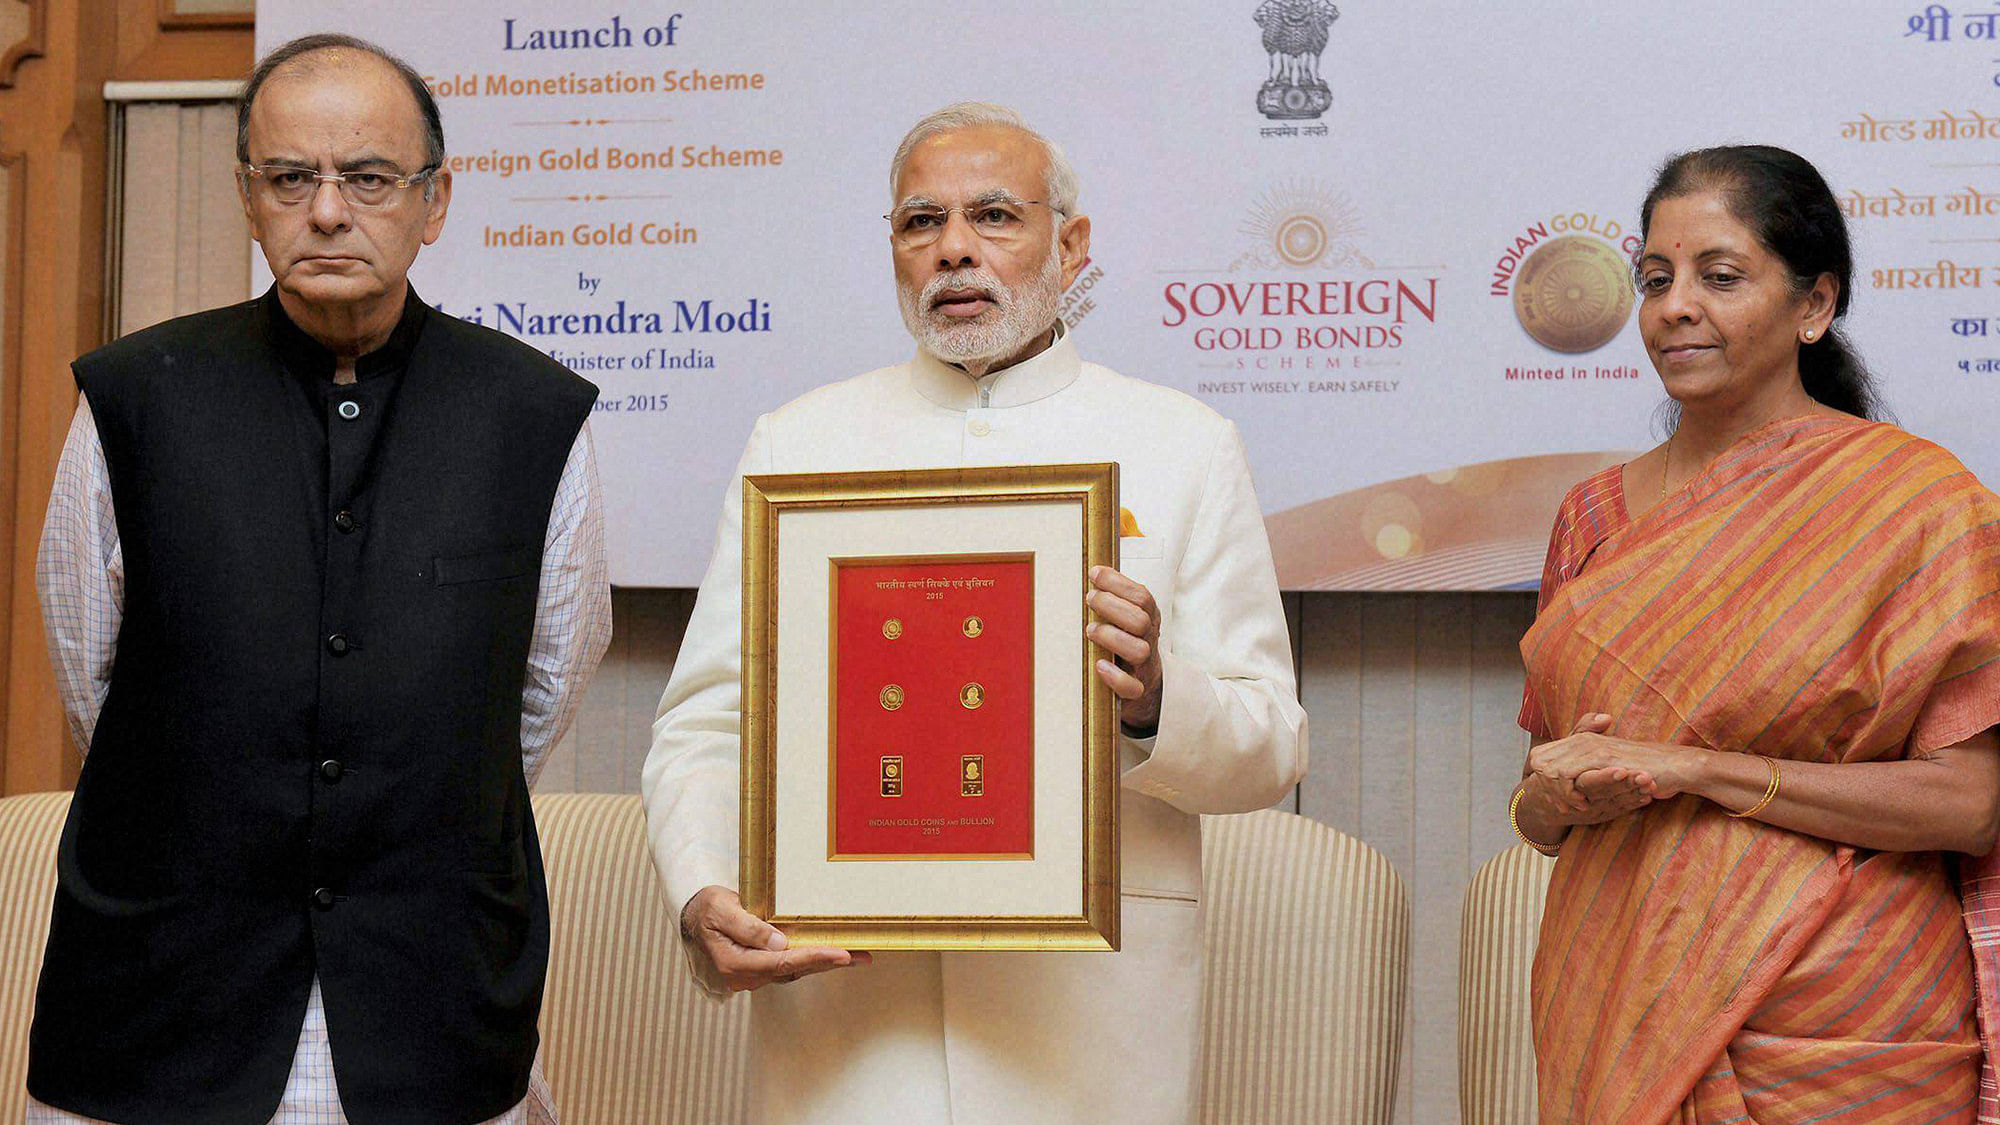 Prime Minister Narendra Modi with Union Finance Minister Arun Jaitley and the Minister of State for Commerce &amp; Industry (Independent Charge), Nirmala Sitharaman during the launch of Government Gold schemes, in New Delhi on Thursday. (Photo: PTI)